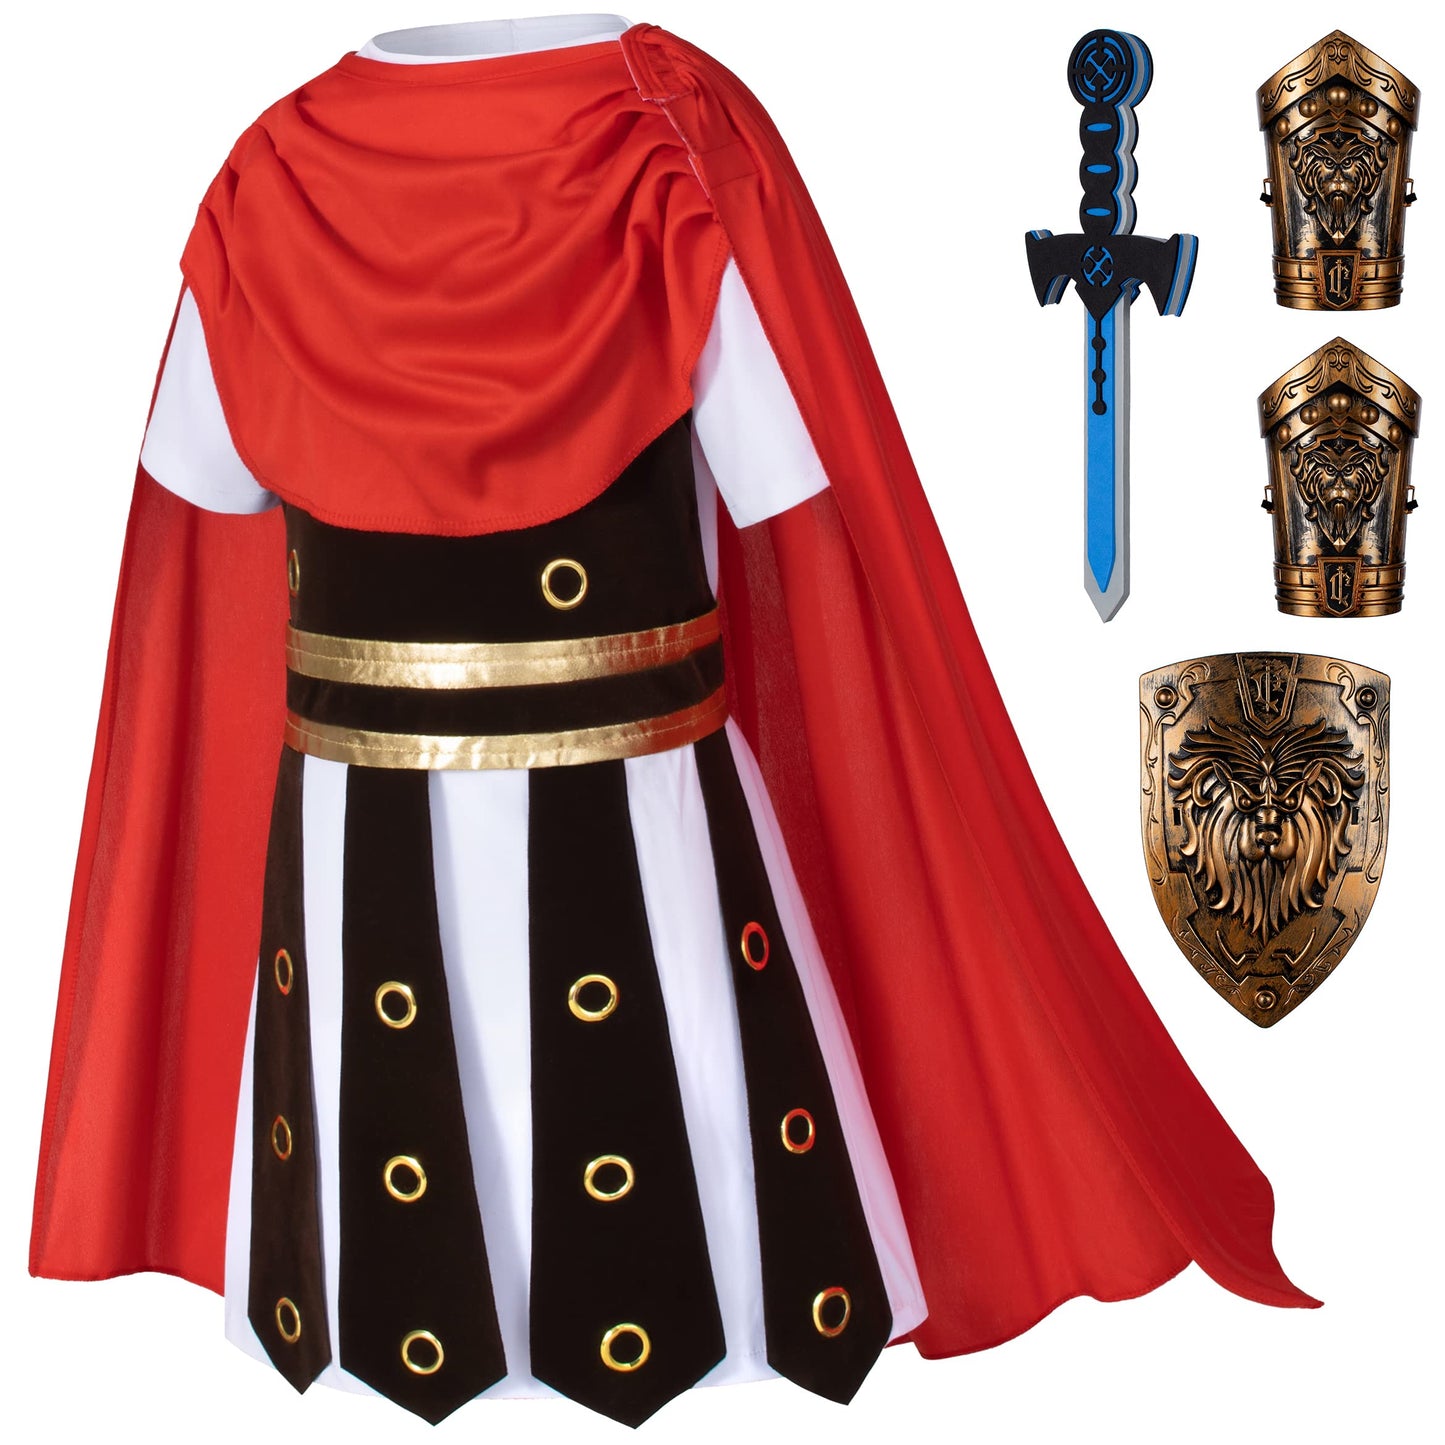 Elibelle Child Medieval Roman Warrior Knight Renaissance Performance Costume with Accessories 4-5Years(120cm) White